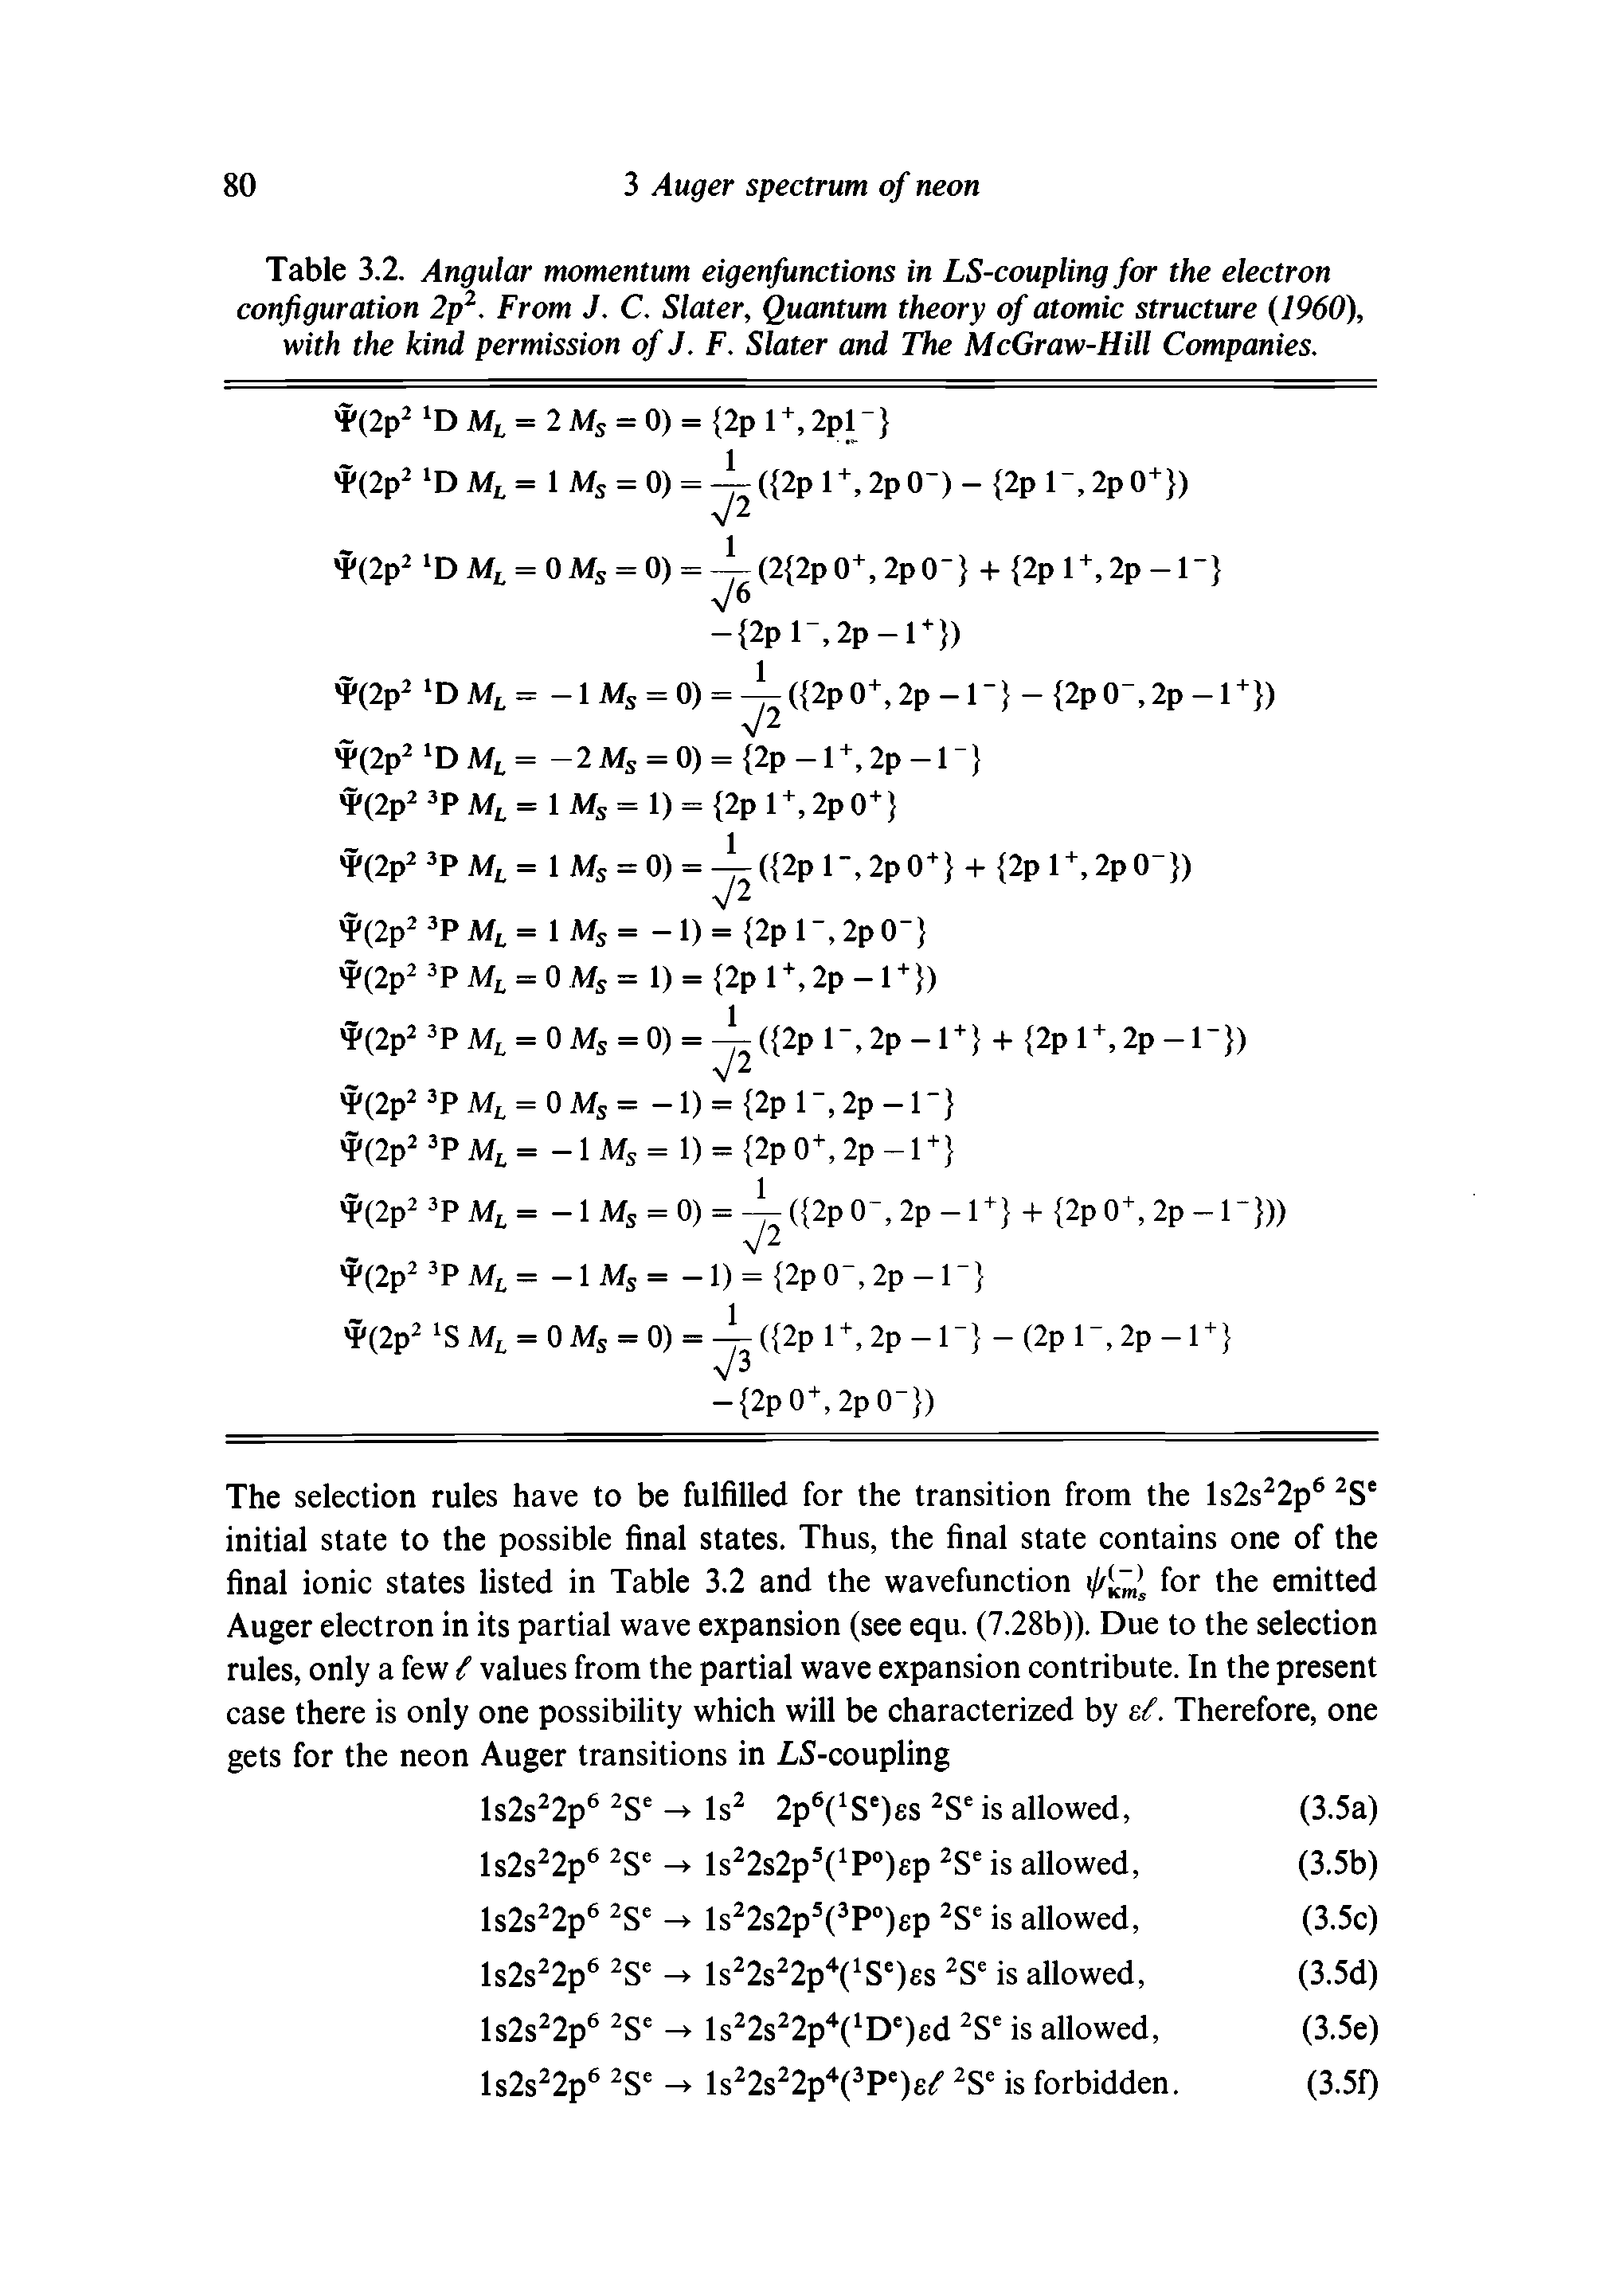 Table 3.2. Angular momentum eigenfunctions in LS-coupling for the electron configuration 2p2. From J. C. Slater, Quantum theory of atomic structure (1960), with the kind permission of J. F. Slater and The McGraw-Hill Companies.